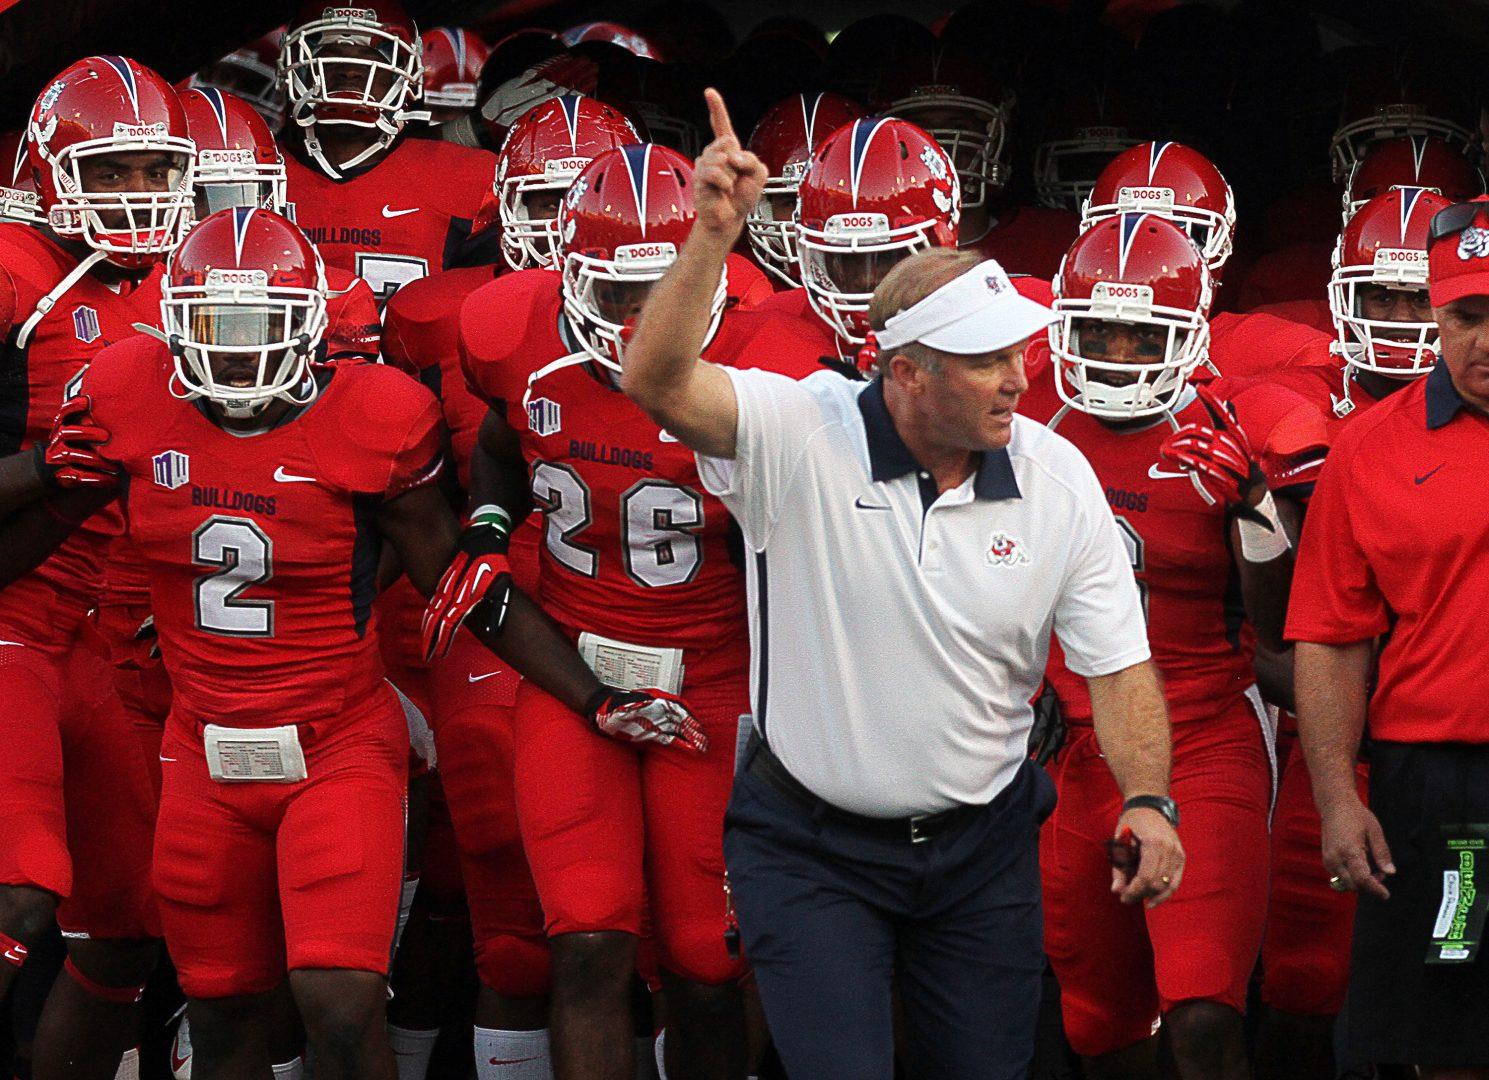 Fresno State head football coach Tim DeRuyter leads the team out of the tunnel before the start of his first game with the program, the season-opener against Weber State, at Bulldog Stadium in Fresno, California. (Craig Kohlruss/Fresno Bee/MCT)